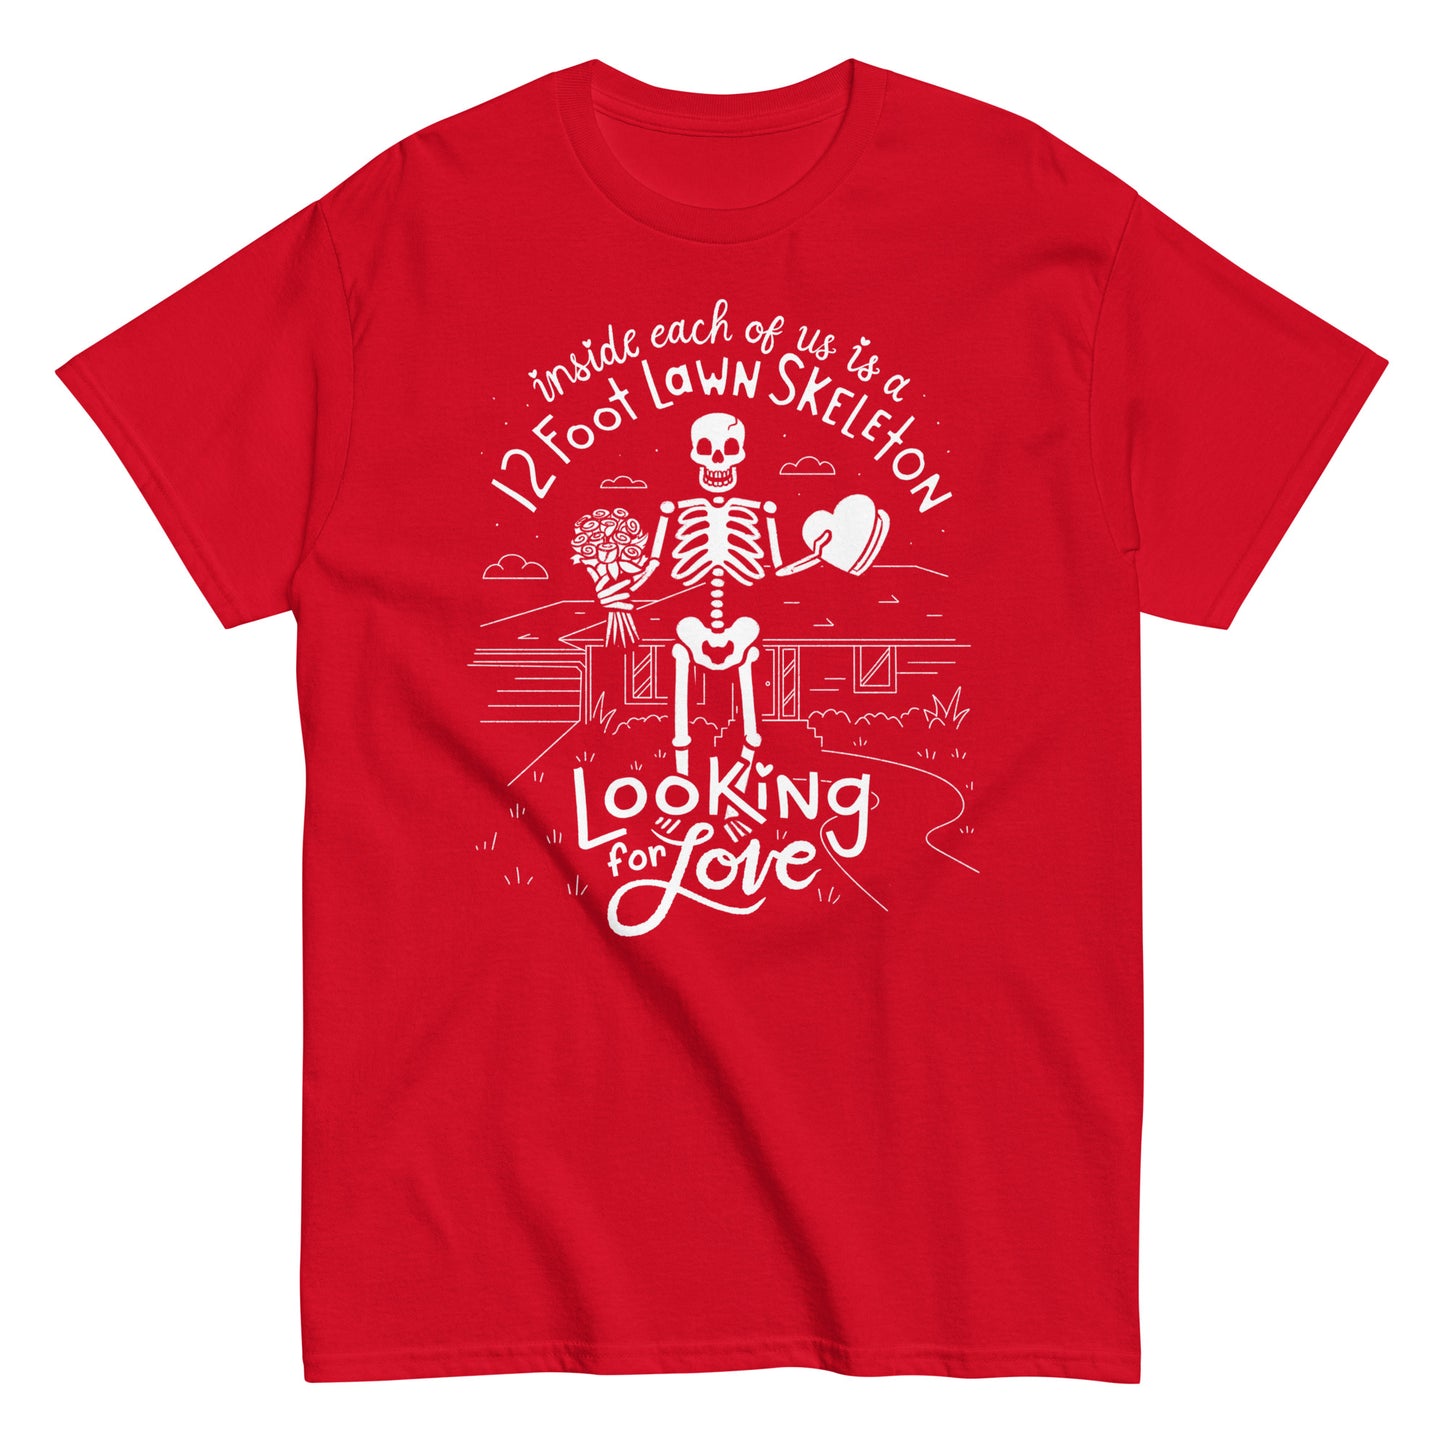 Romance is Dead - 12 Foot Skeleton Looking For Love - Funny T-Shirt for Valentine's Day